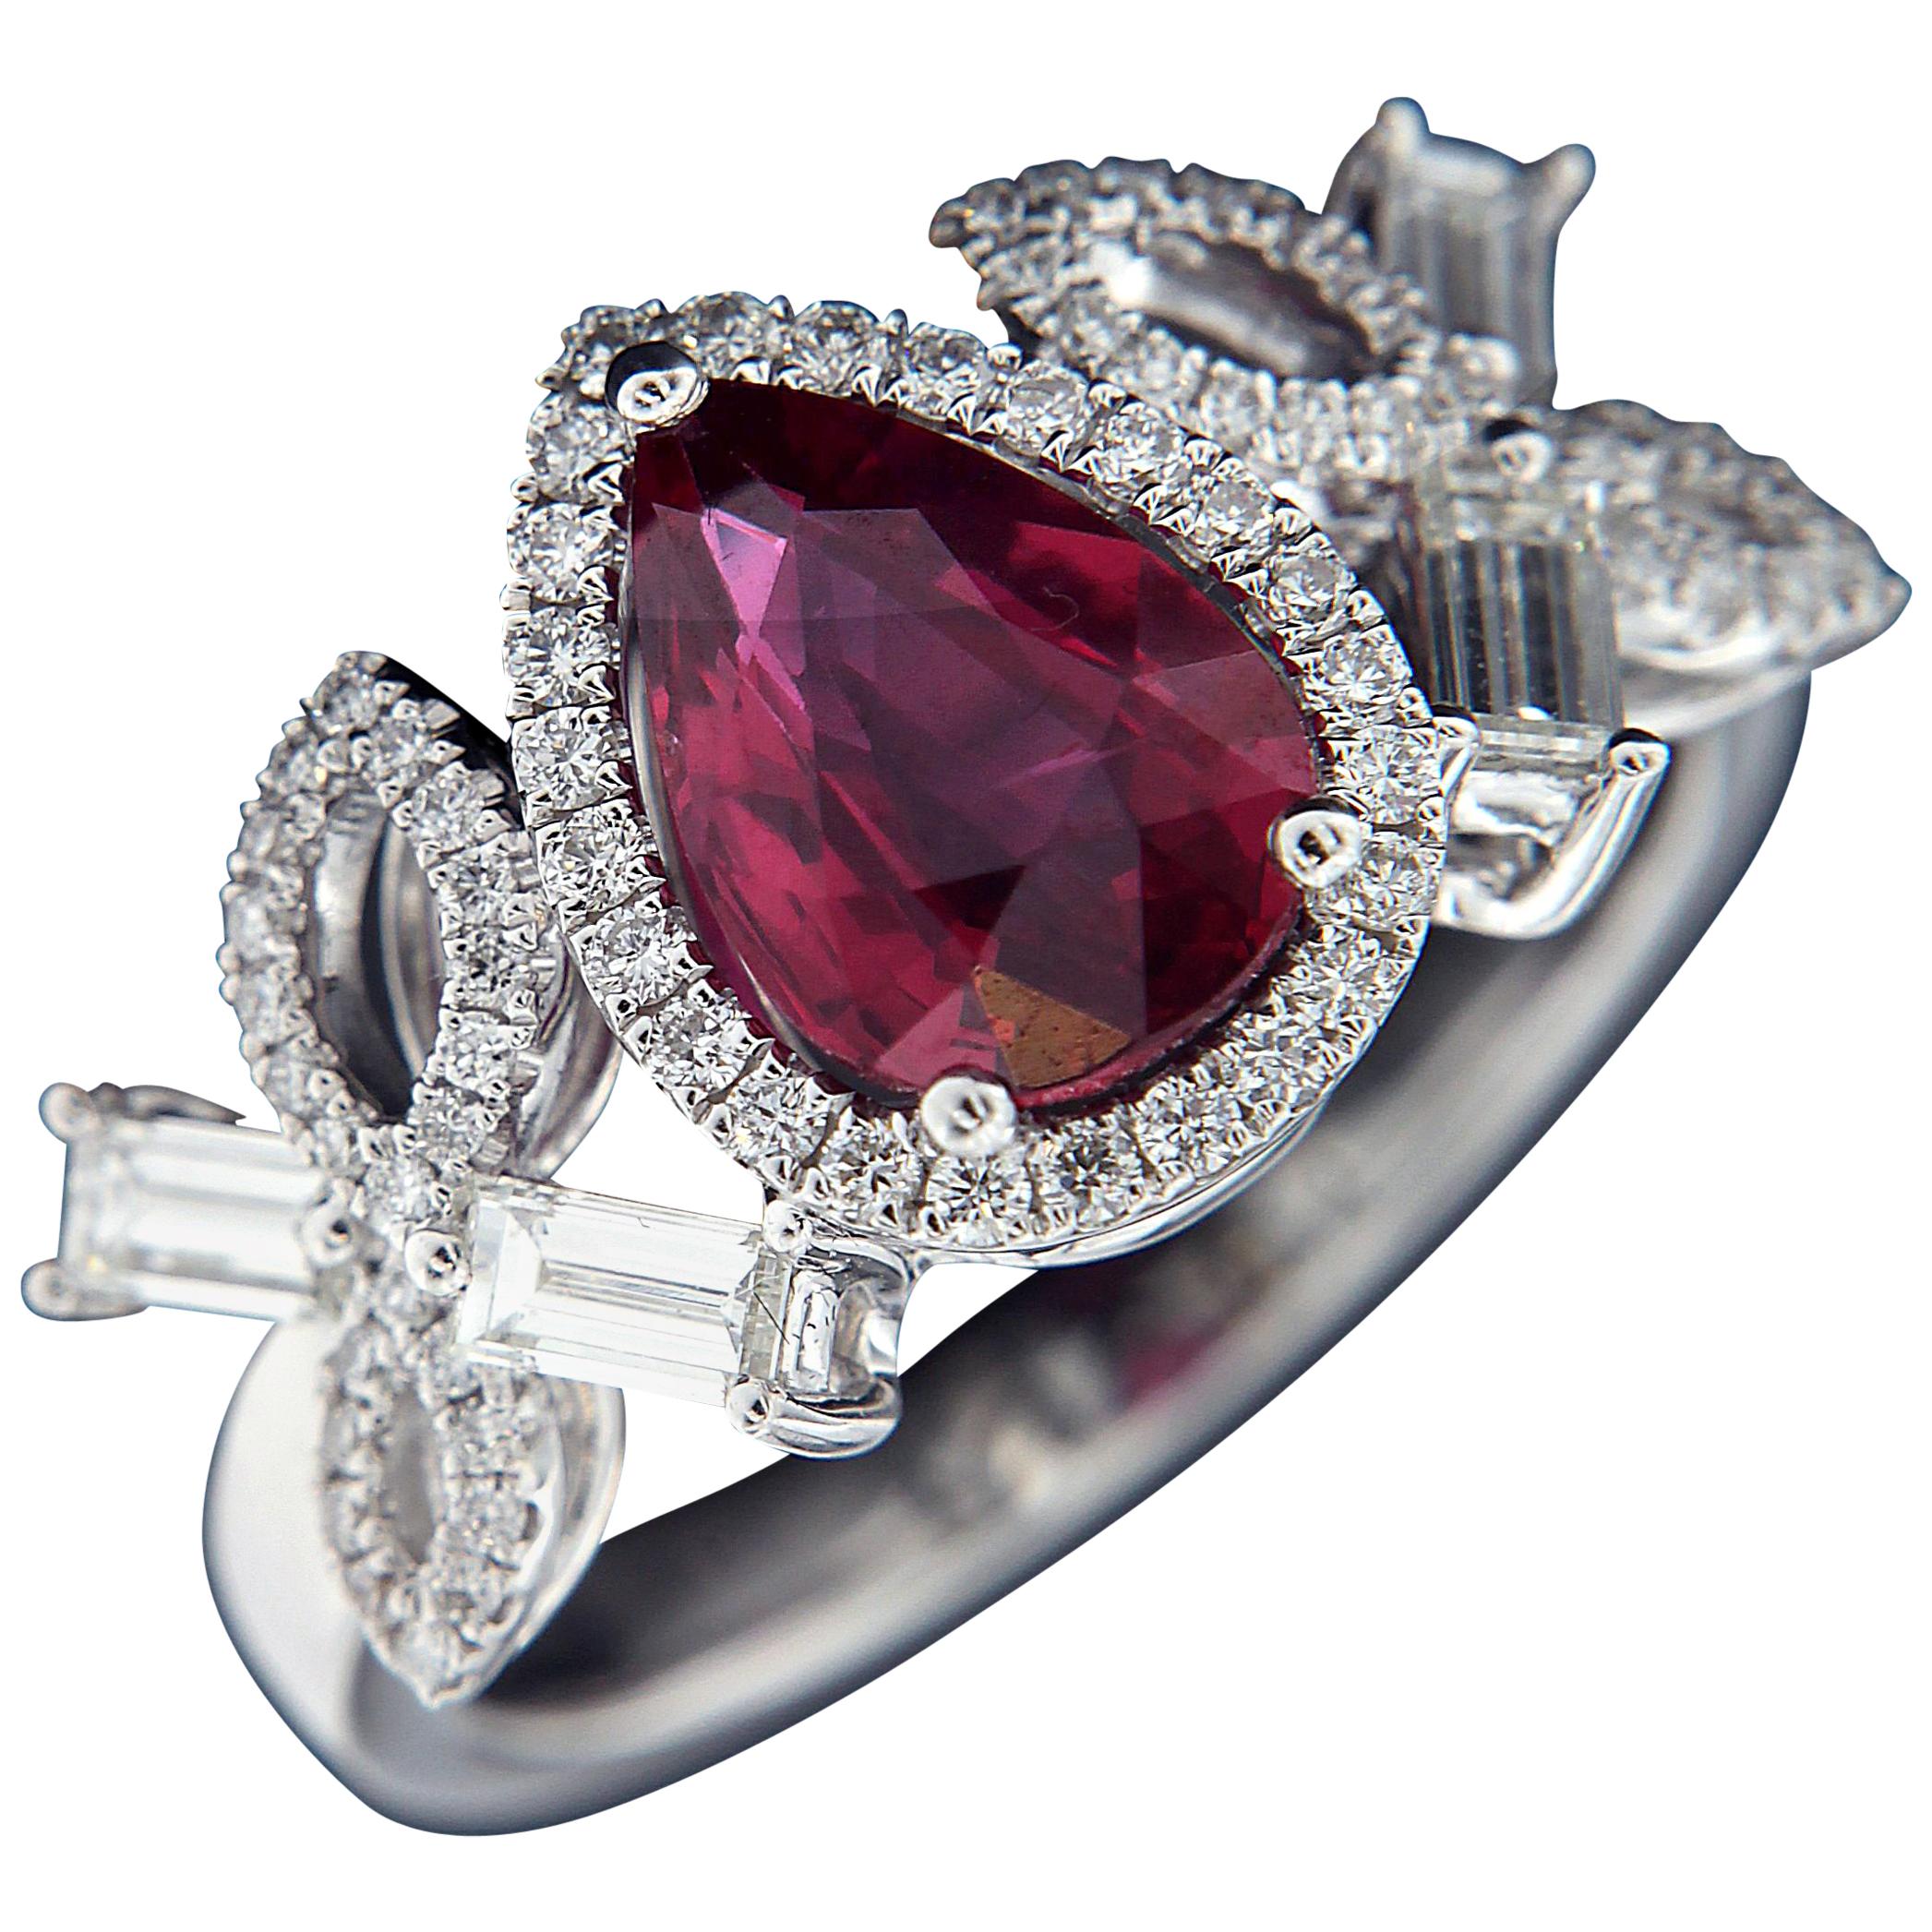 Exceptional 18 Karat White Gold, Diamond and Ruby Ring For Sale